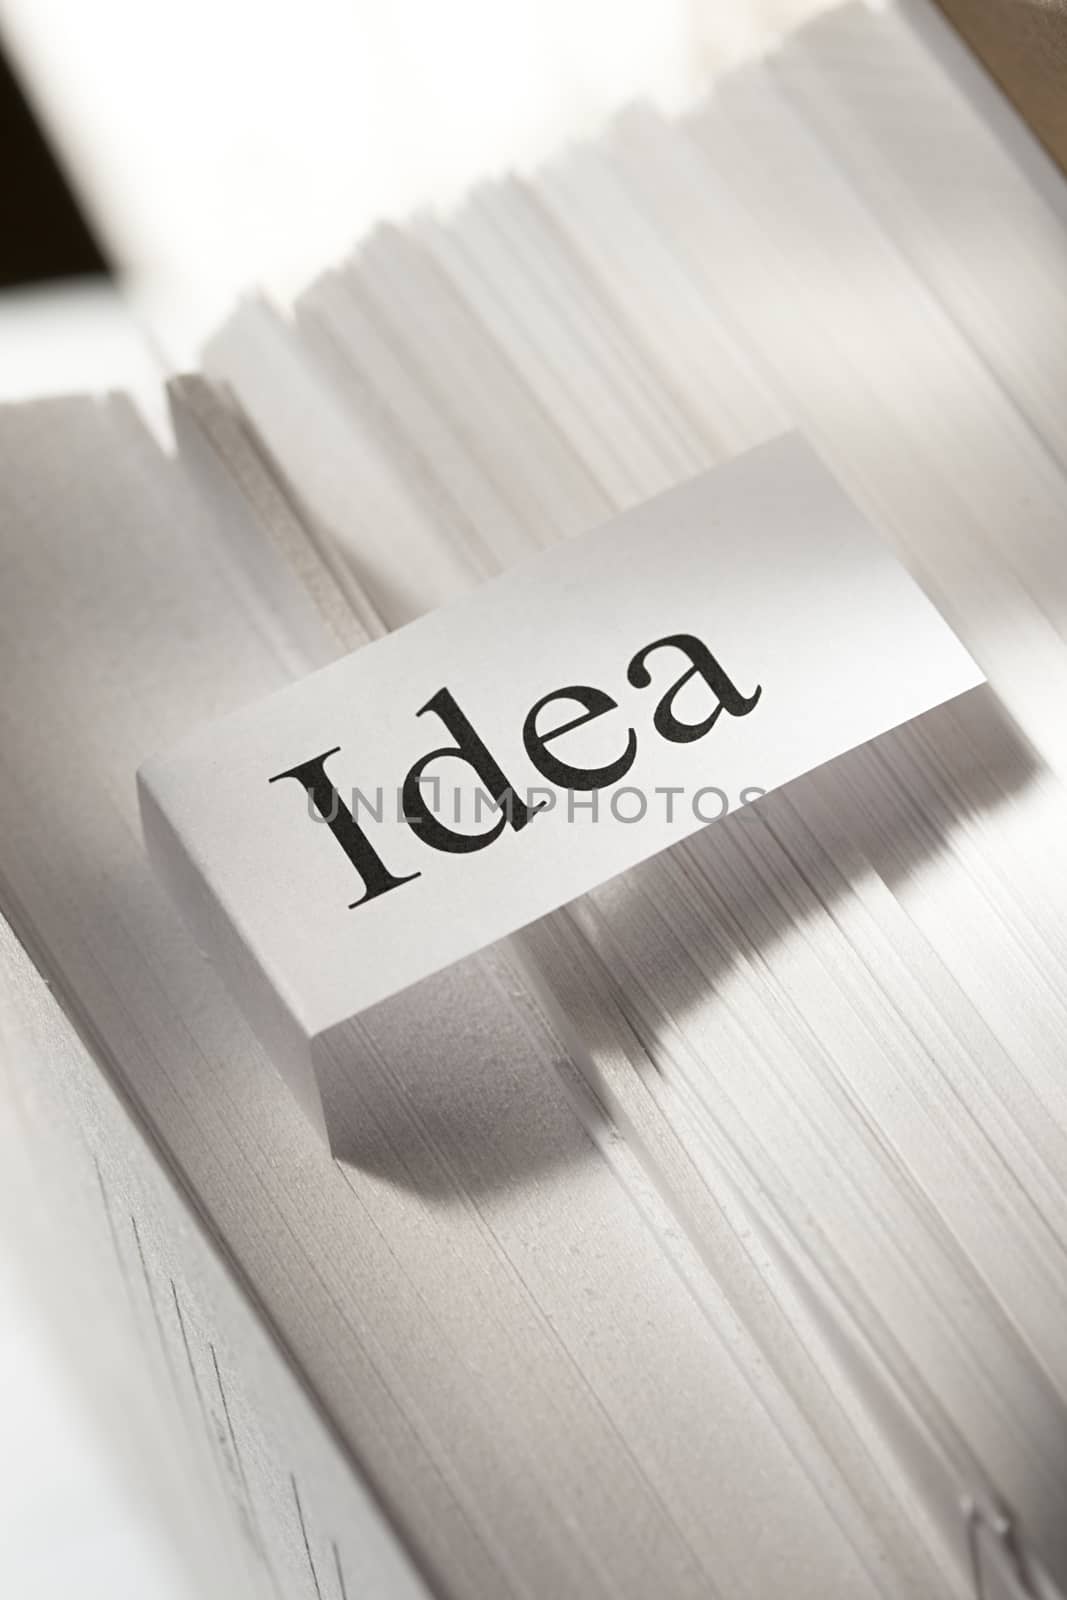 Idea conception with stack of paper cards by Garsya